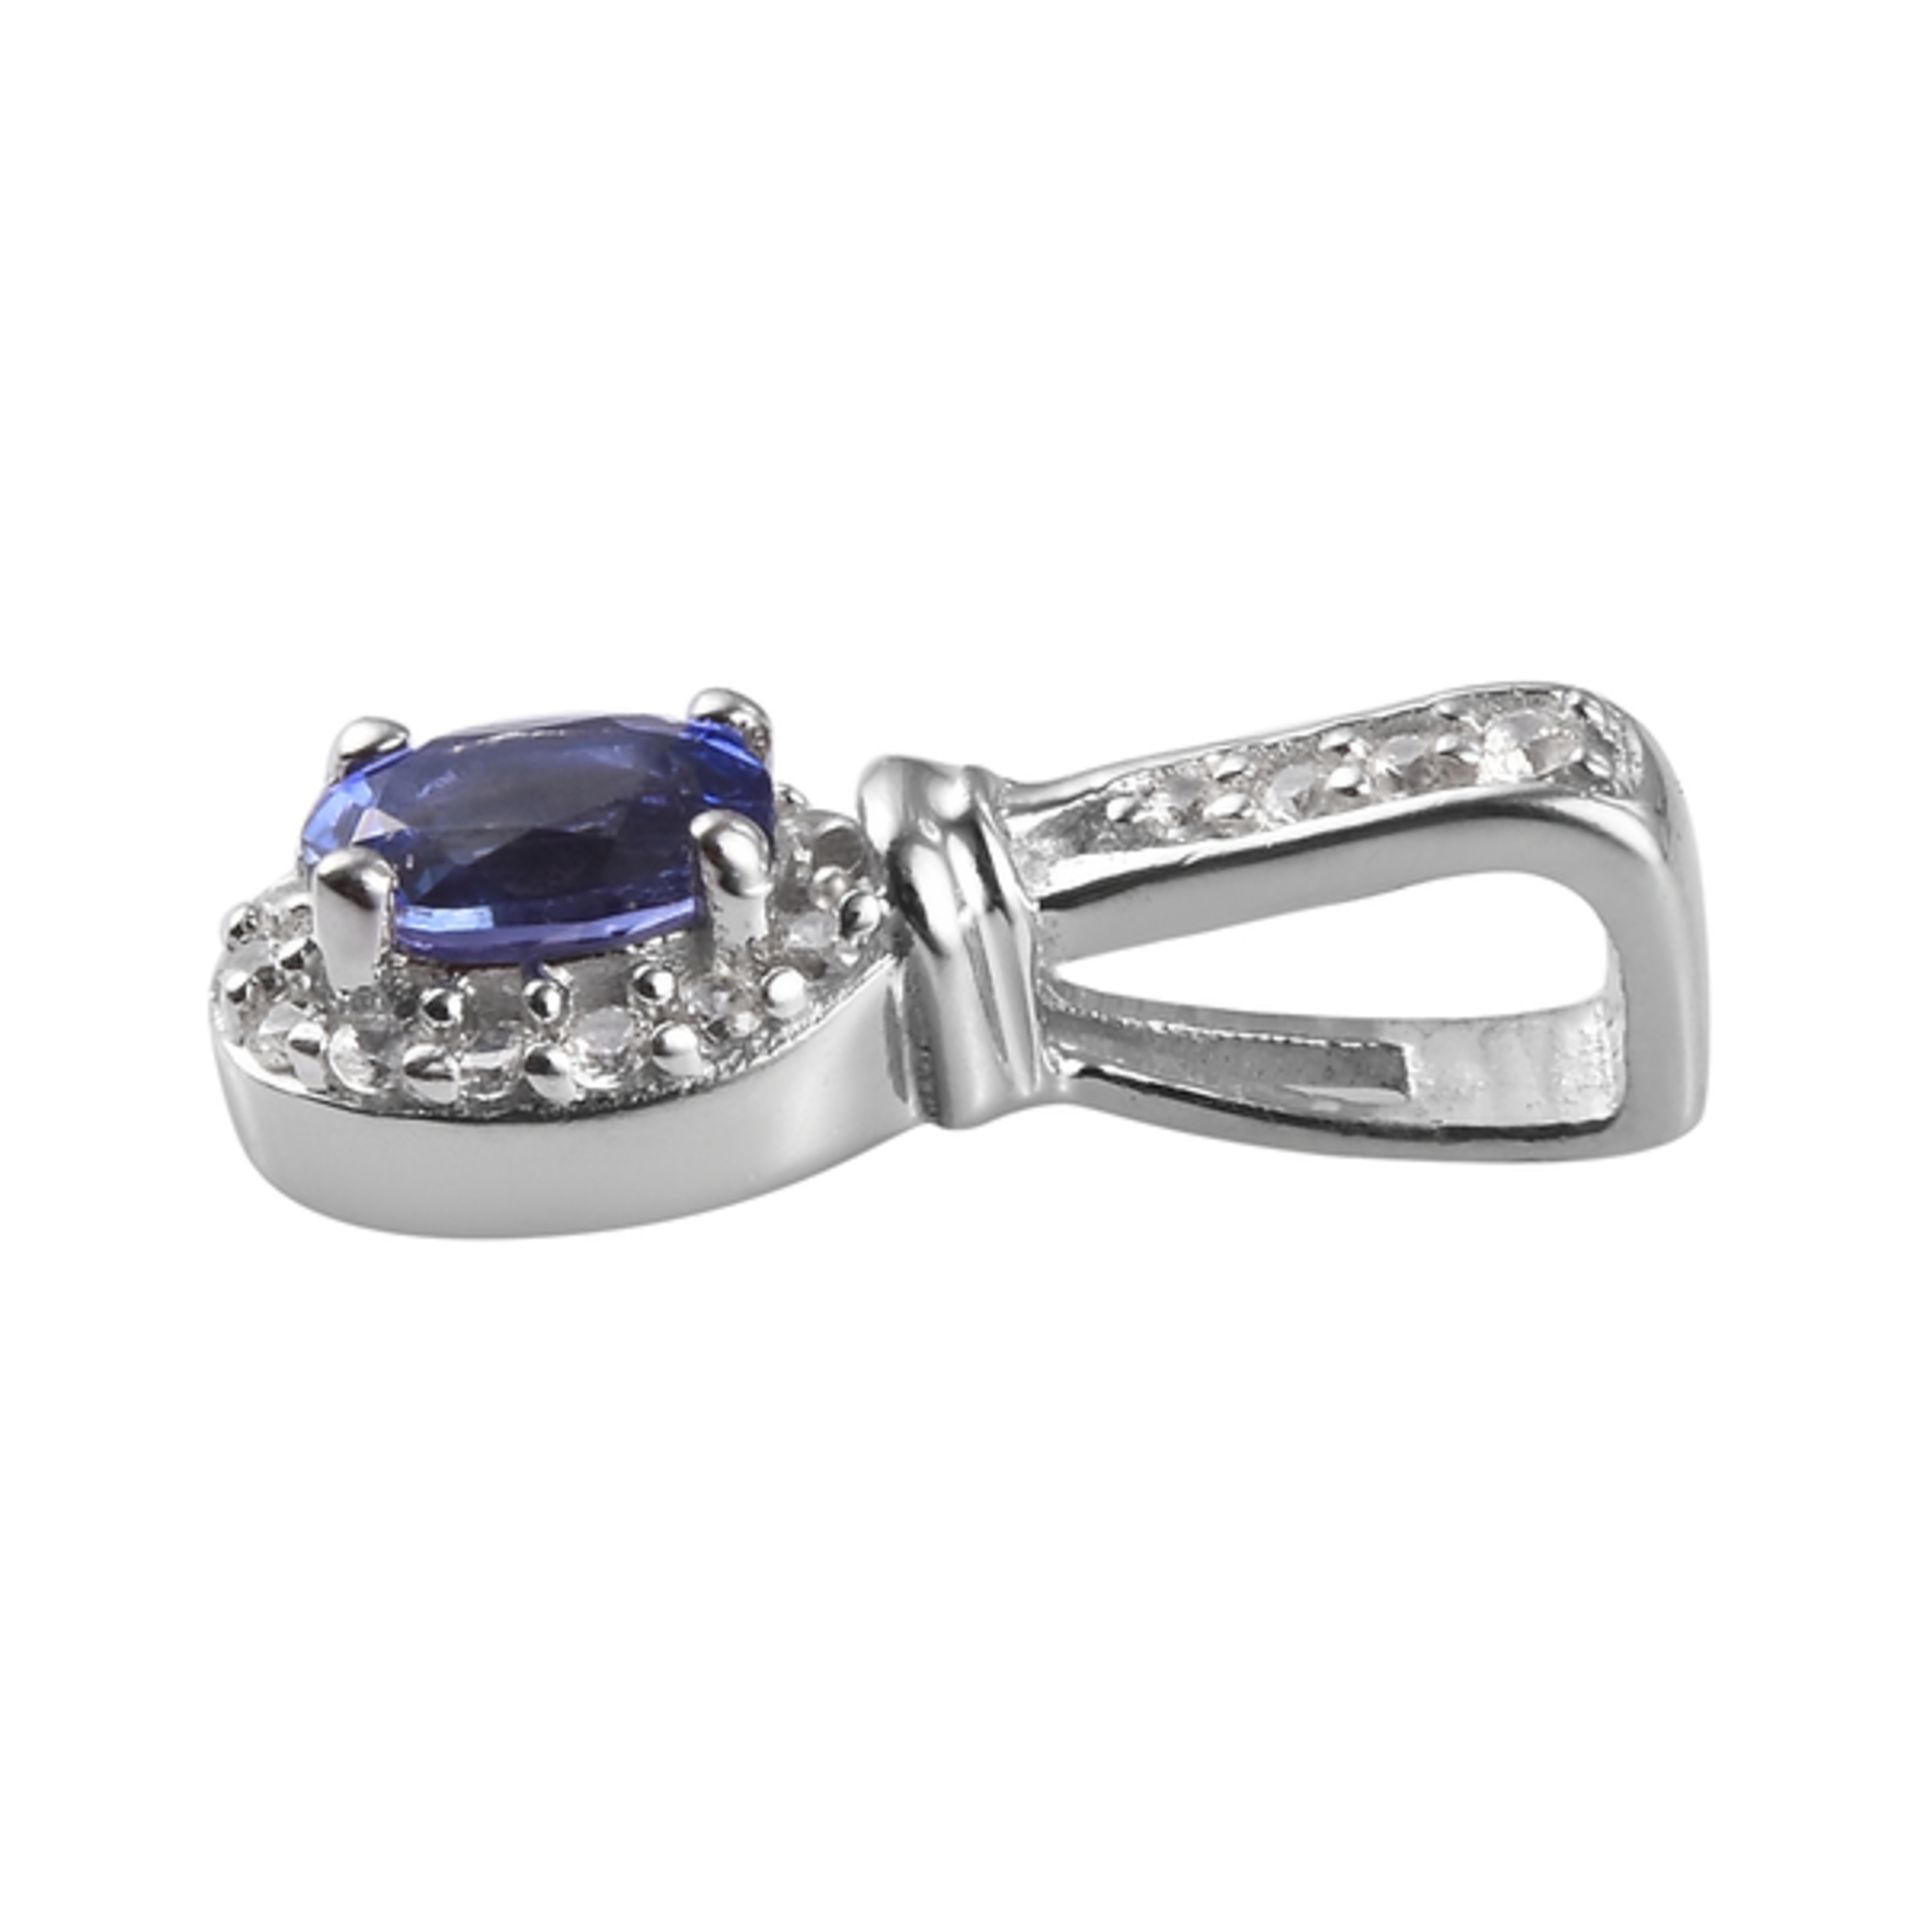 New! 2 Piece Set - Tanzanite and Natural Cambodian Zircon Ring and Pendant - Image 6 of 7